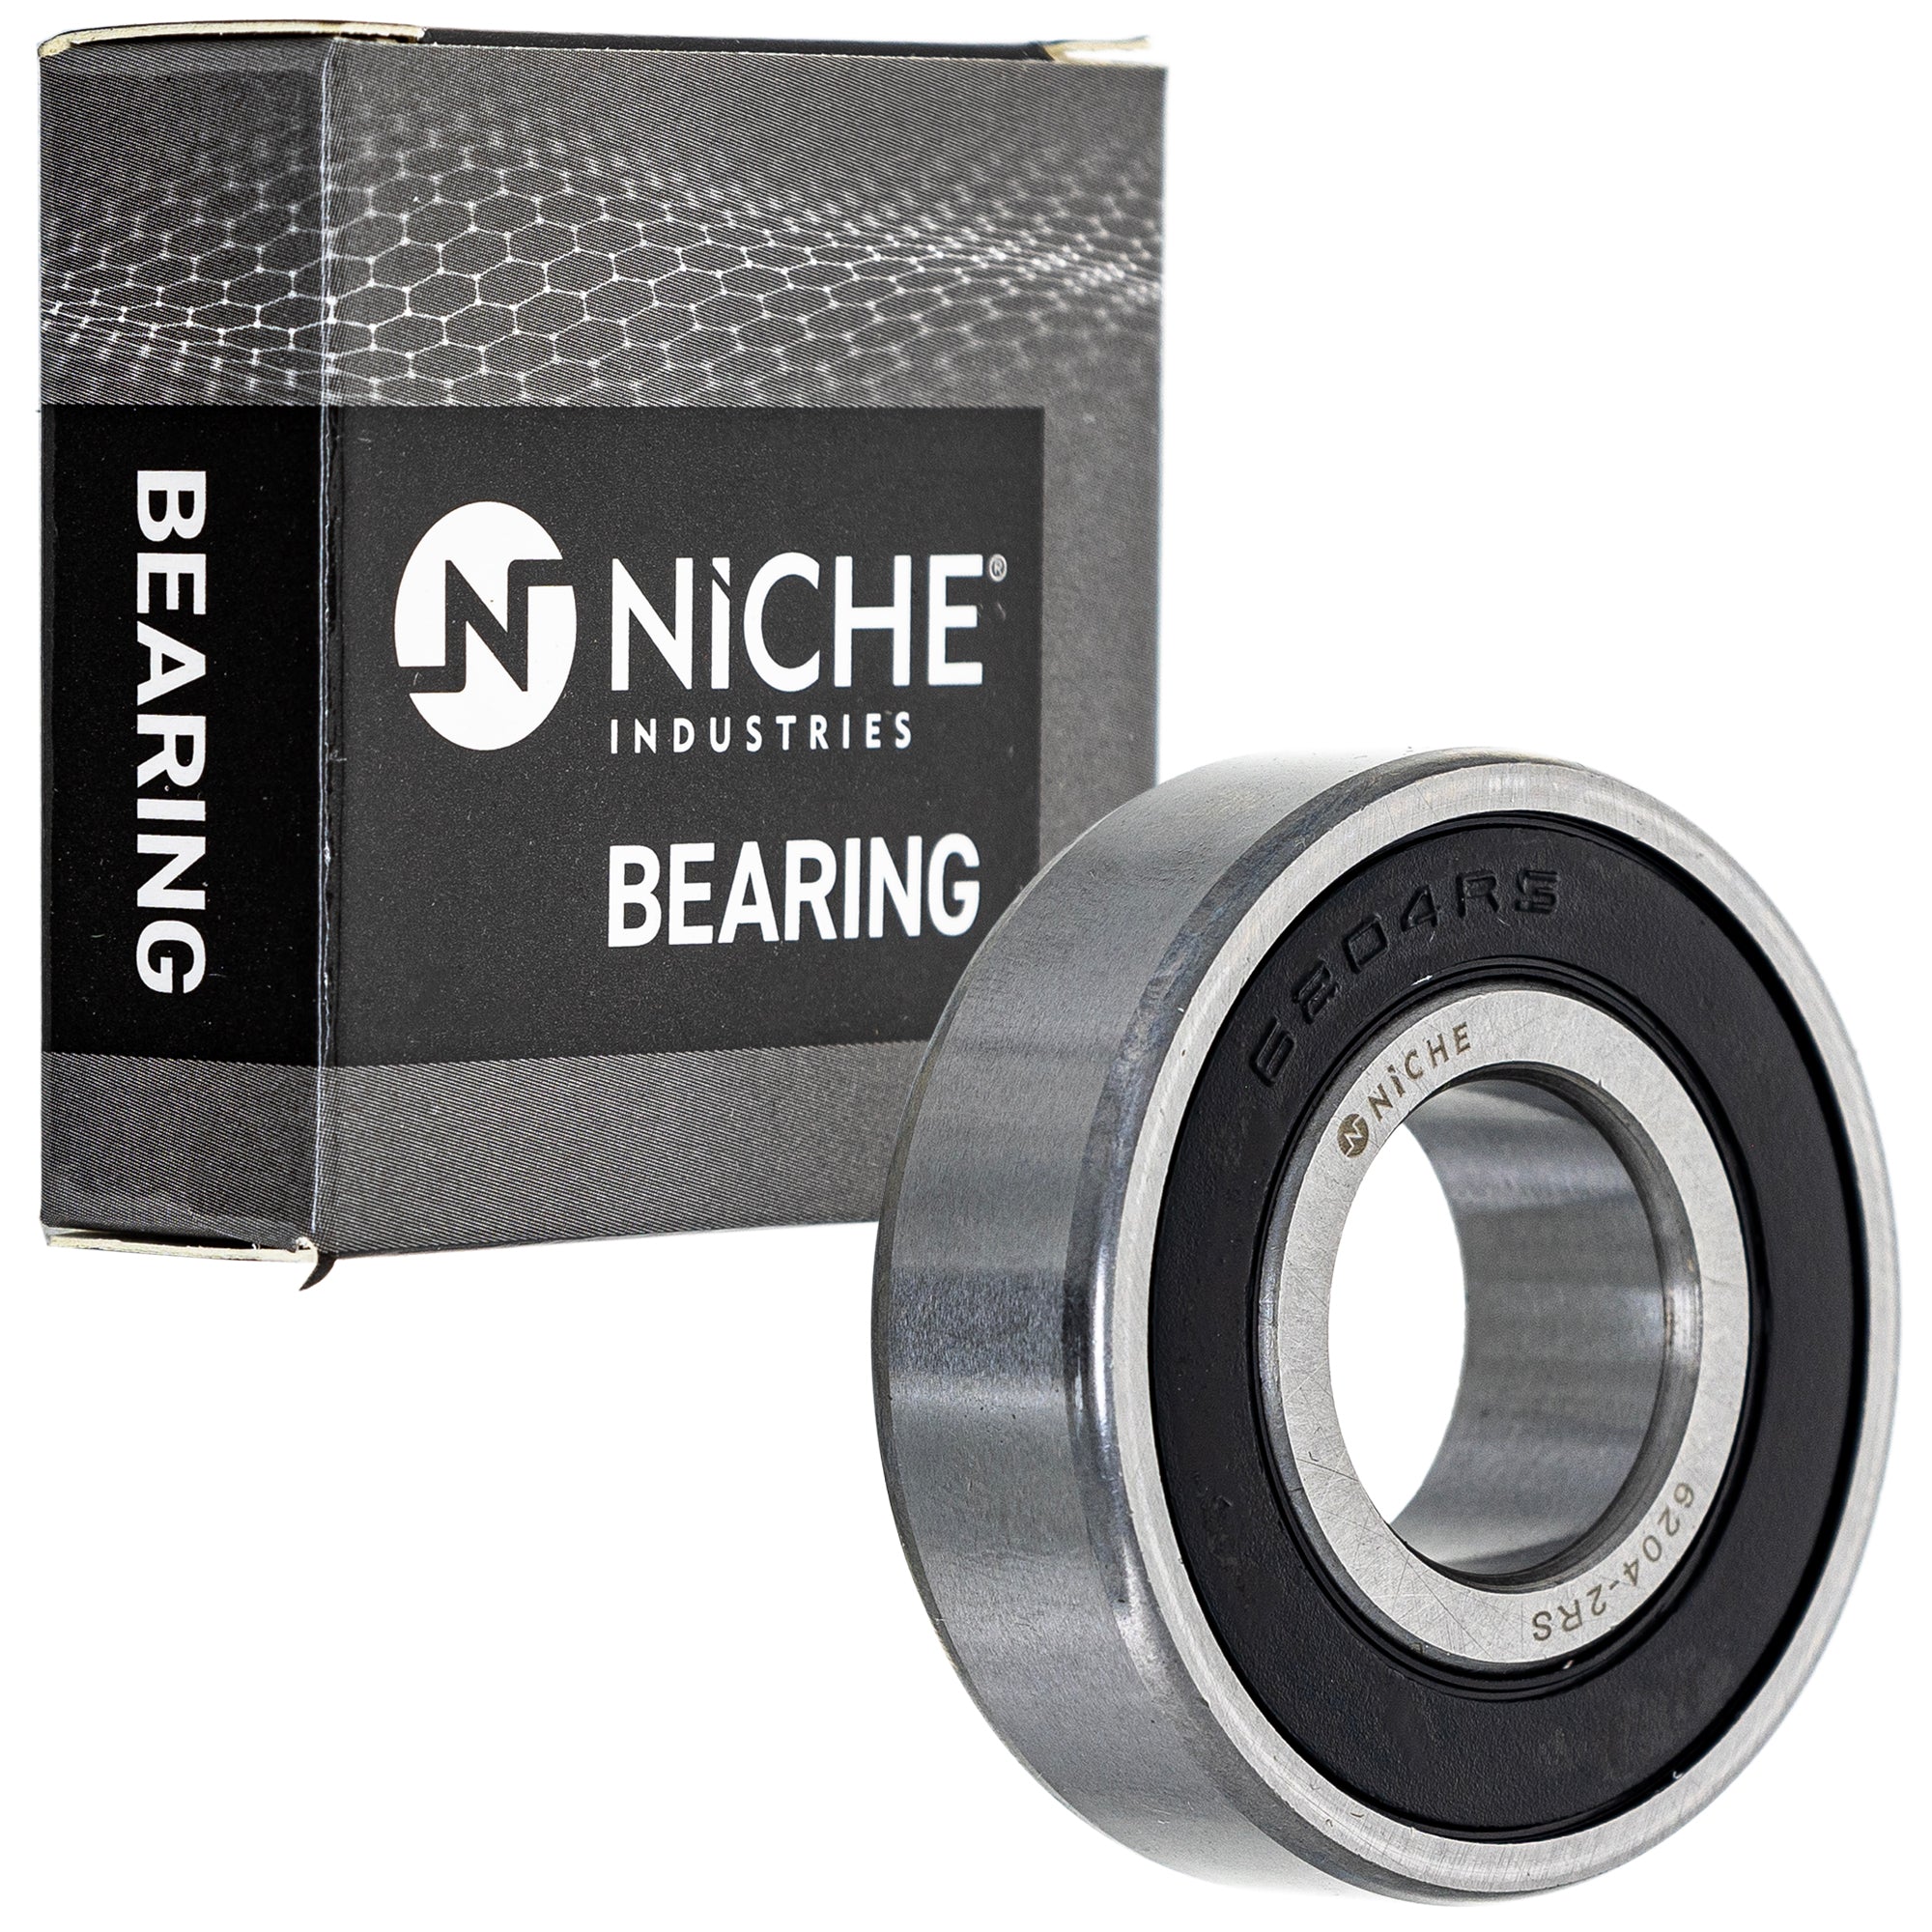 NICHE 519-CBB2229R Bearing 10-Pack for zOTHER Snapper MURRAY Murray